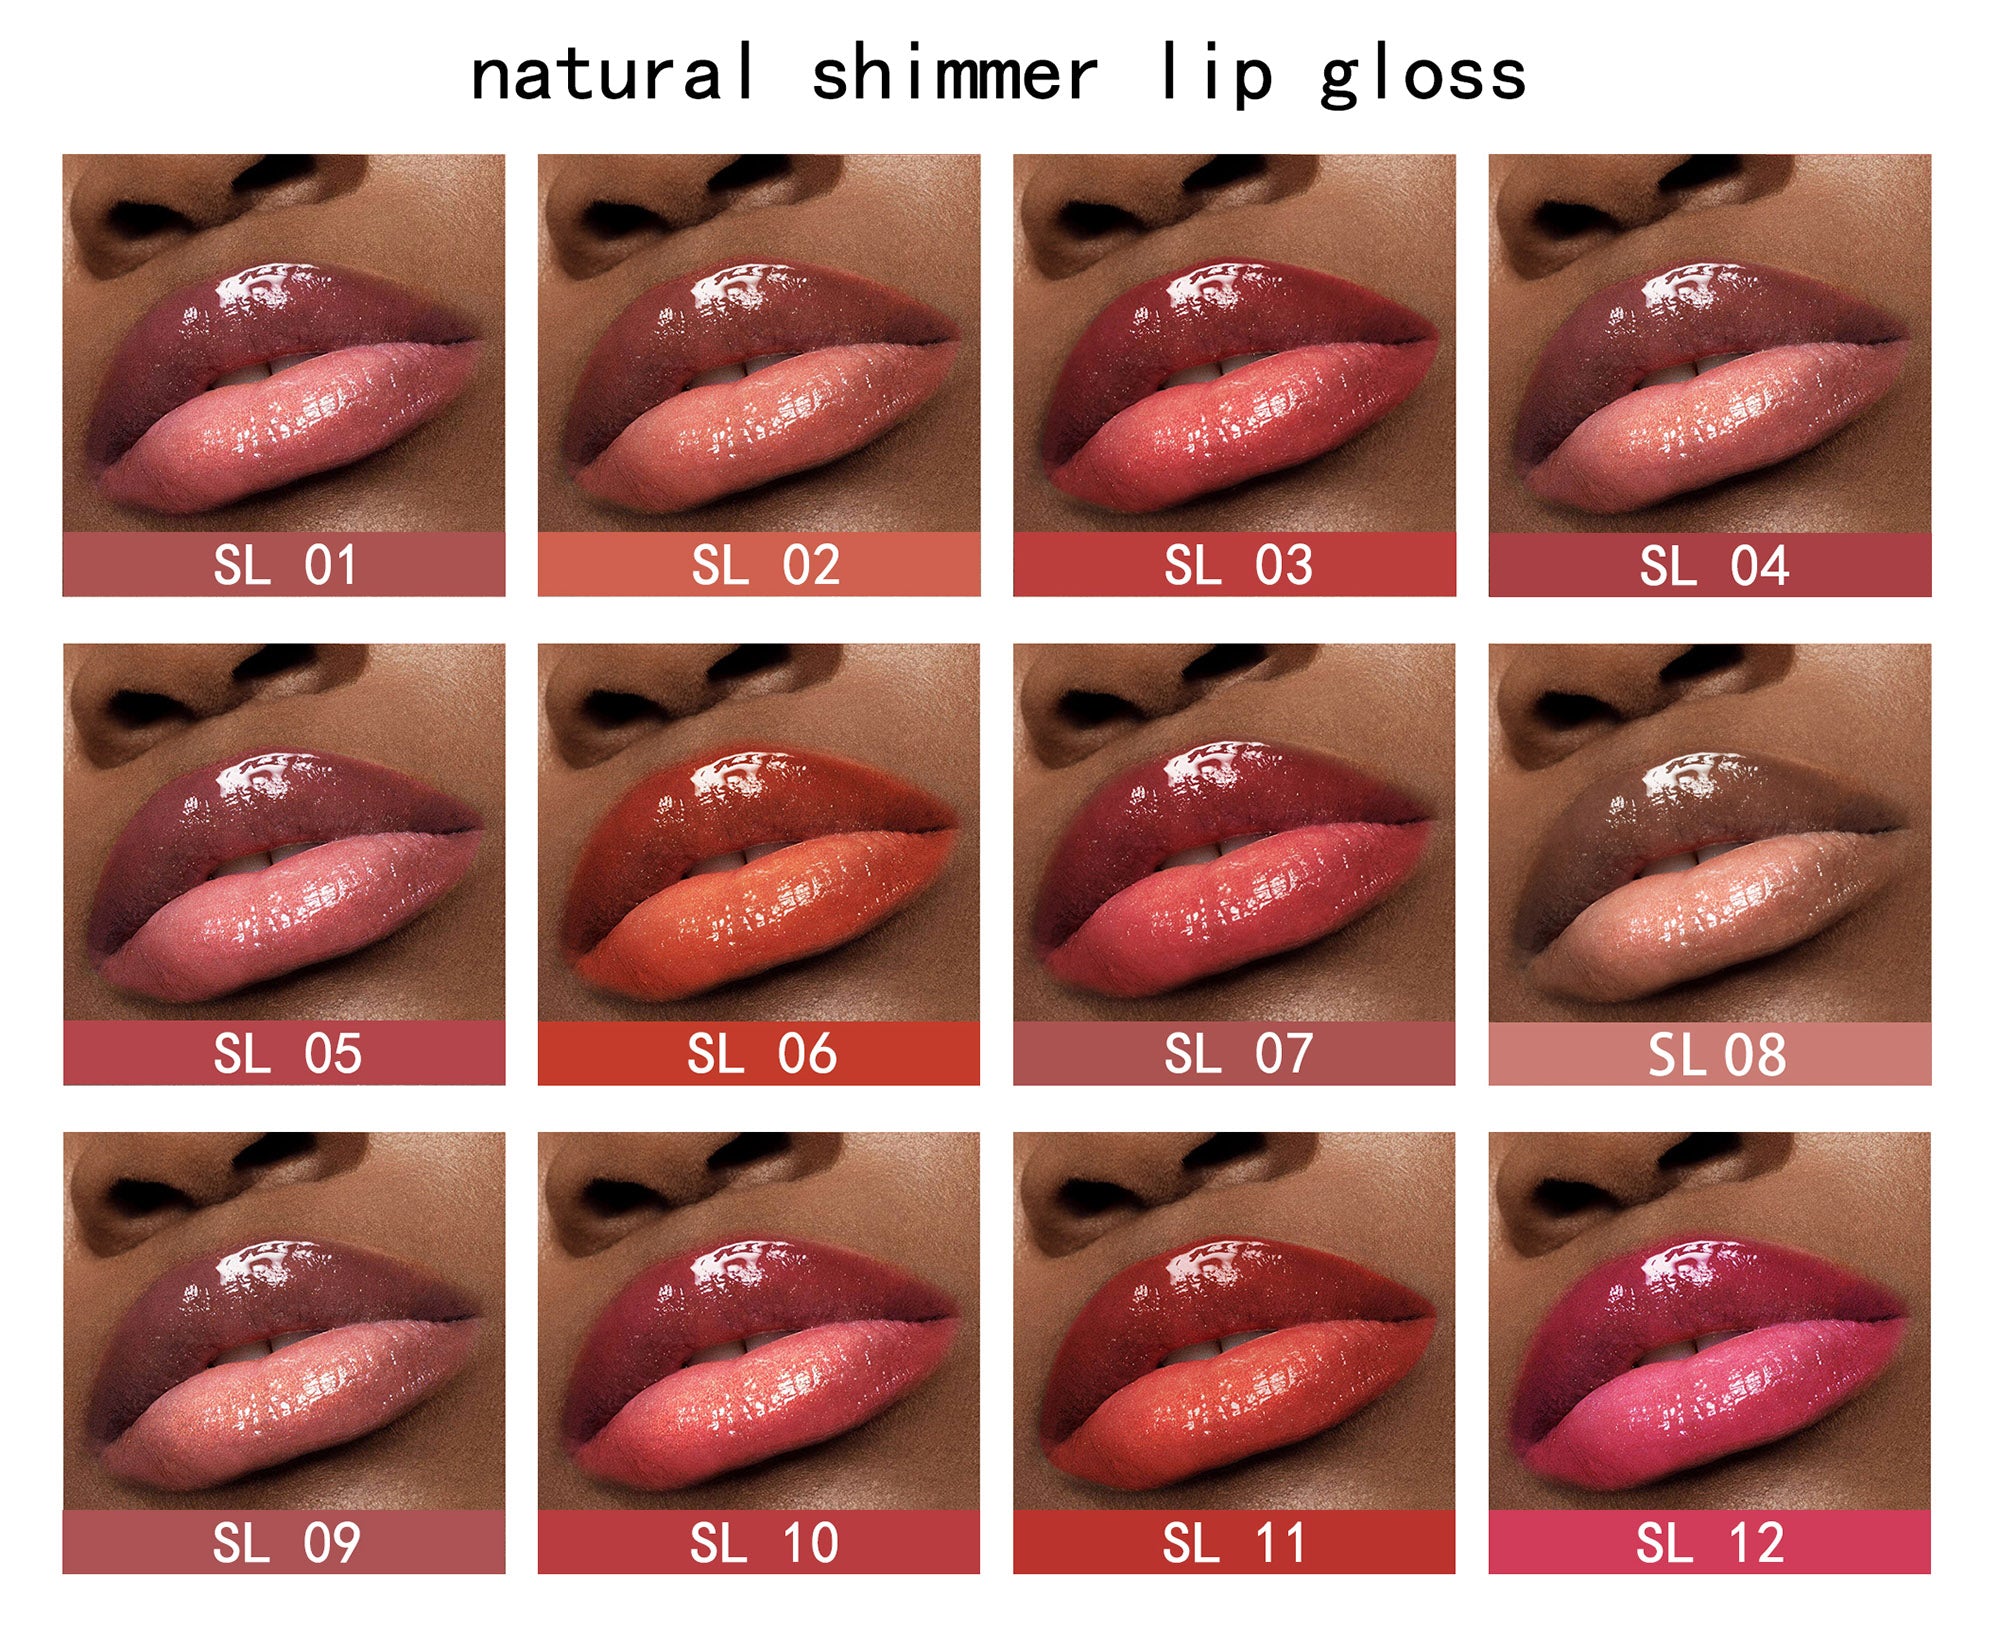 Groothandel luxe glinsterende lipgloss